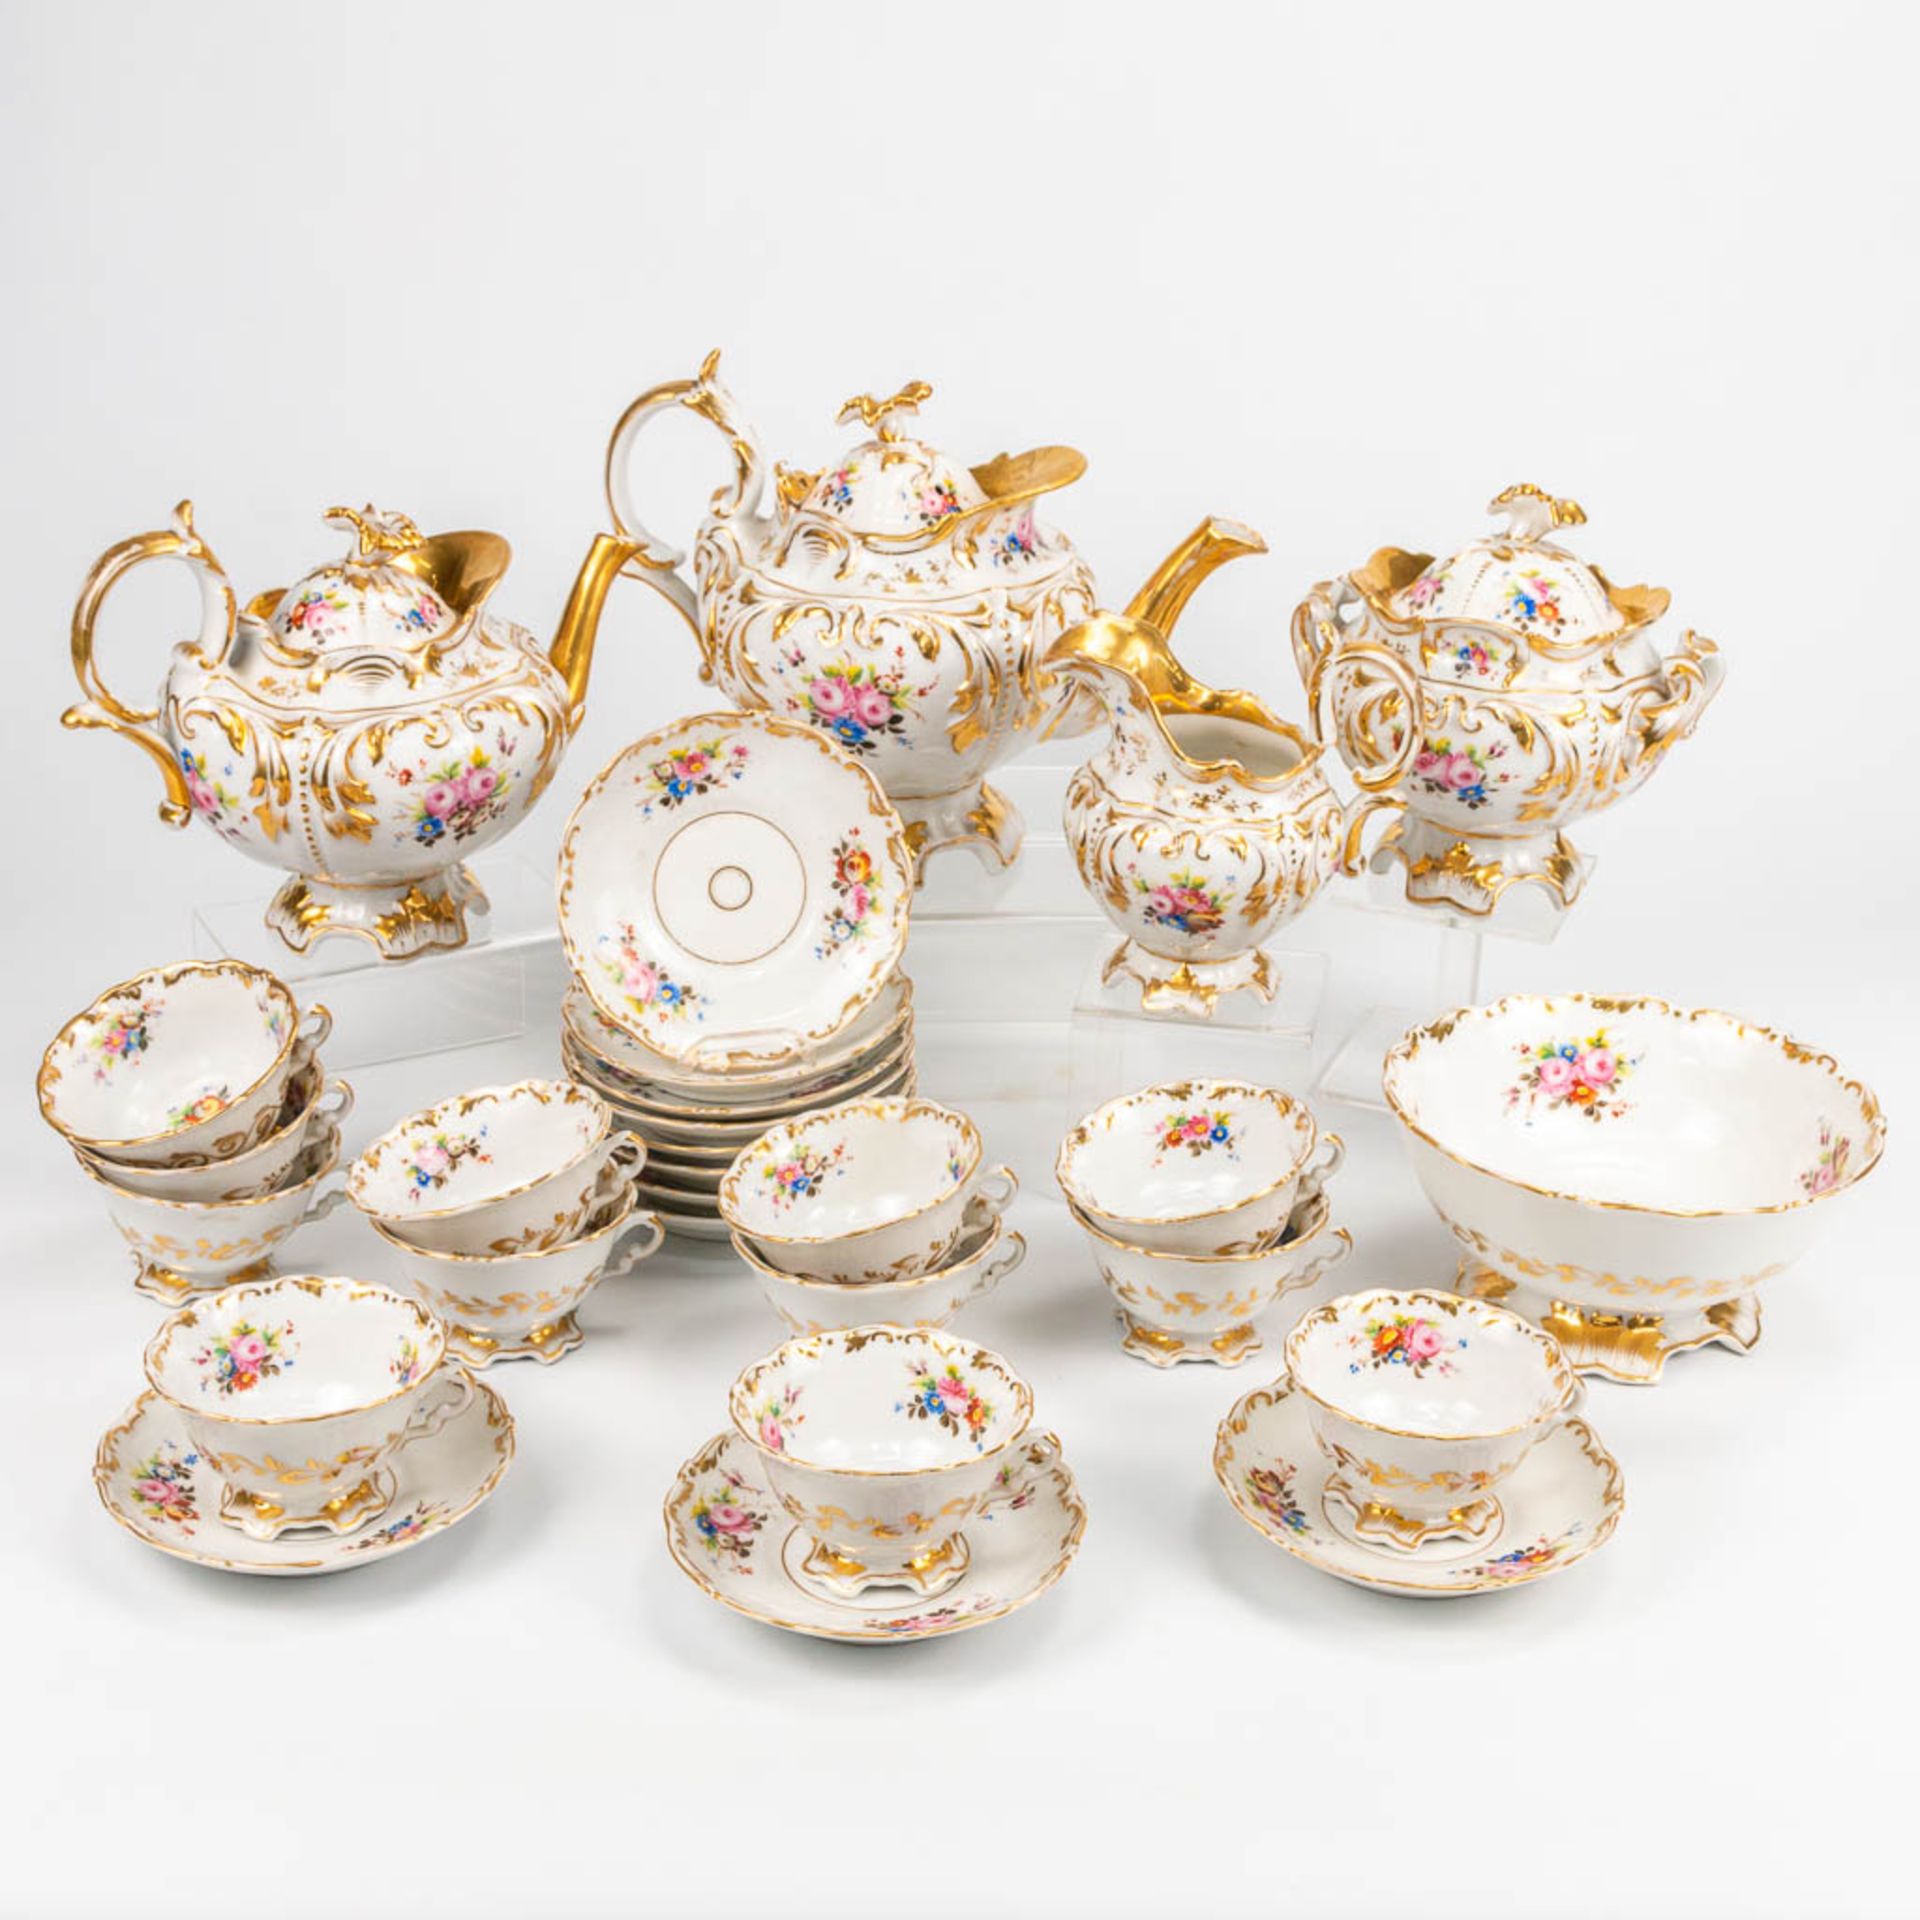 A coffee and tea service made of Vieux Bruxelles porcelain with hand painted flower decors. (20 x 28